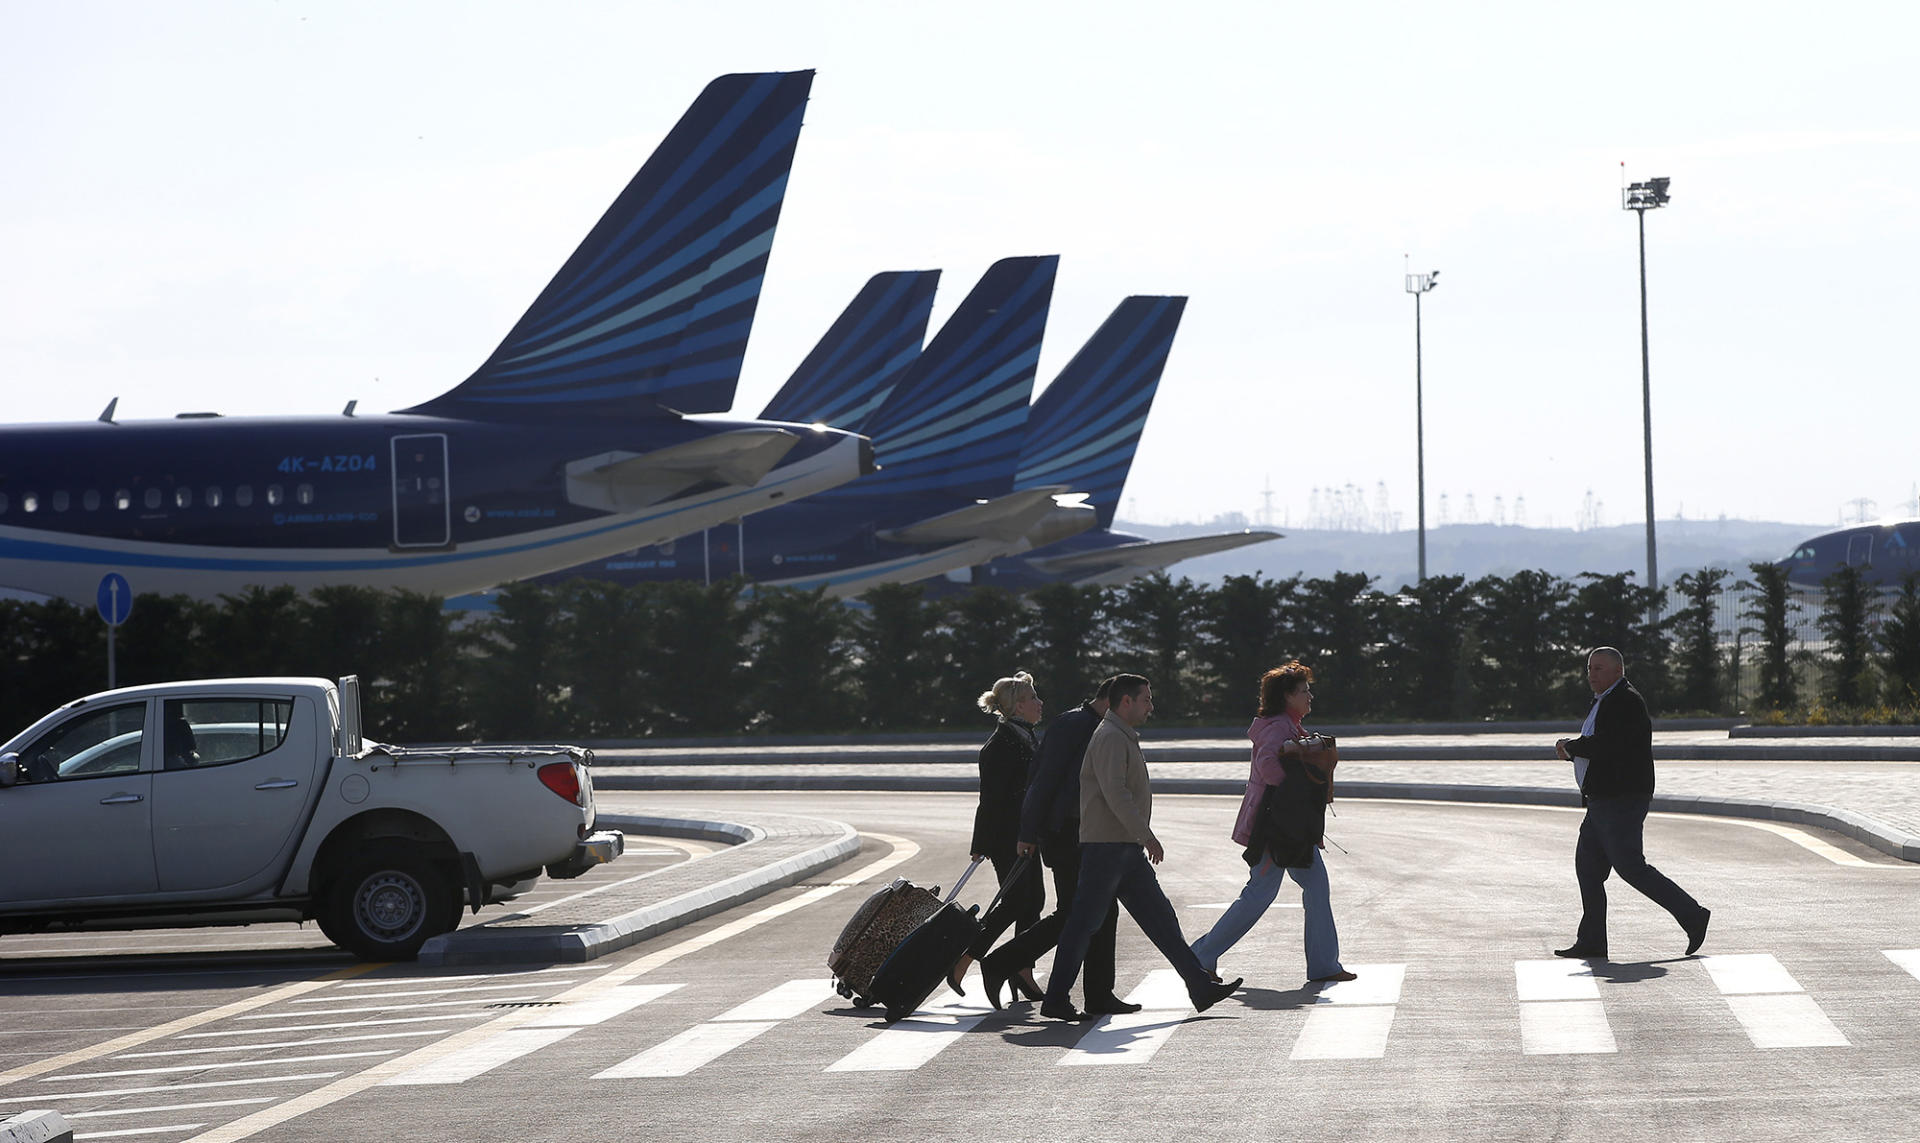 Heydar Aliyev Int’l Airport reaches highest growth rate in passenger traffic in June